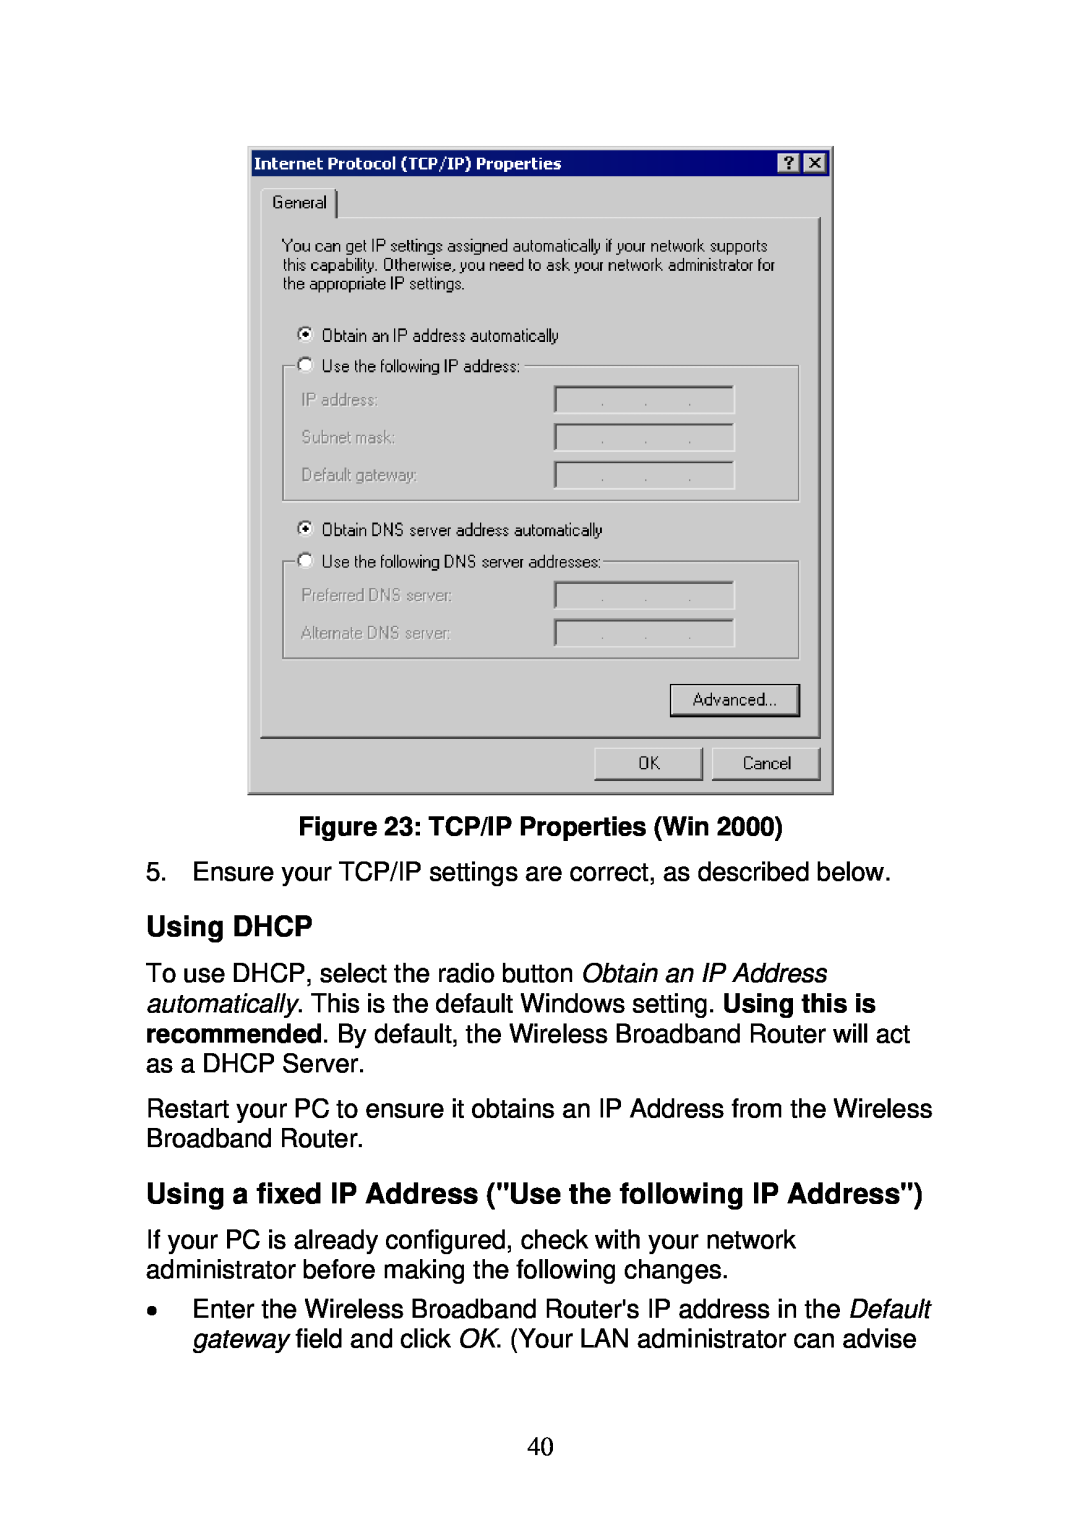 3Com WBR-6000 user manual Using DHCP, Using a fixed IP Address Use the following IP Address, TCP/IP Properties Win 